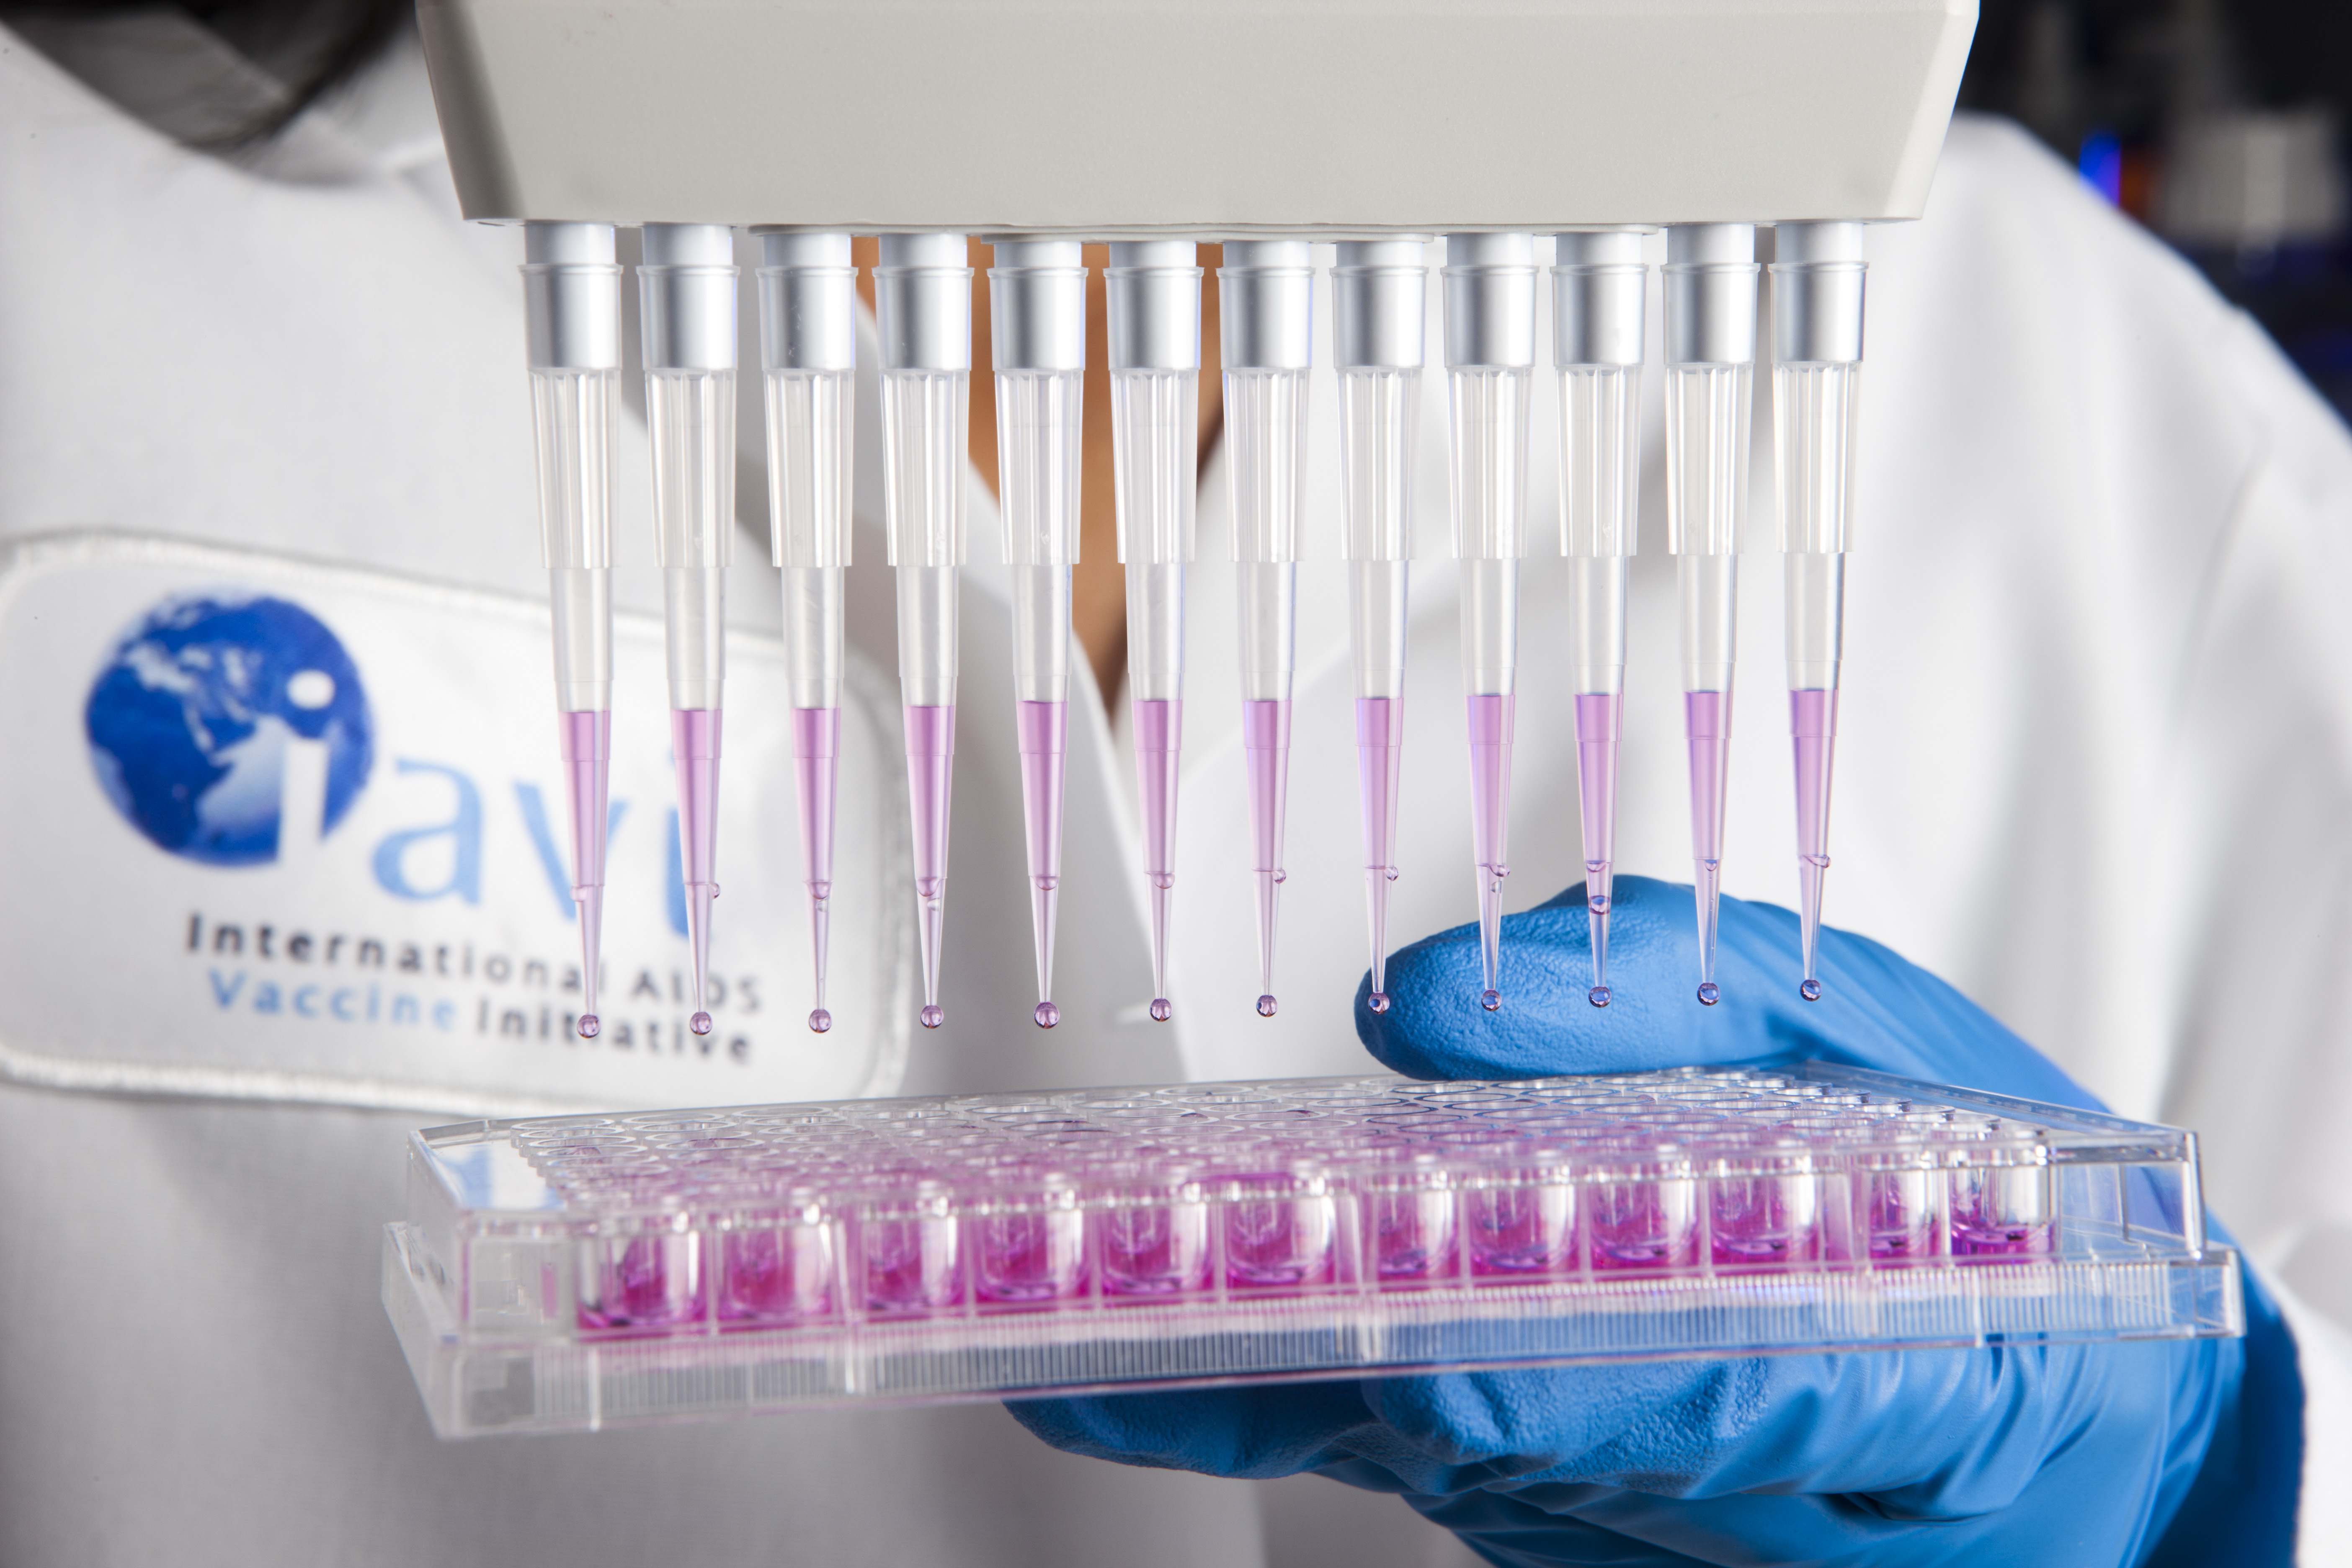 The IAVI Design and Development Lab (DDL) is the hub of IAVI research and development in the quest for an AIDS vaccine.  The DDL is the only laboratory in the world exclusively focused on AIDS vaccine research.  The DDL meets the highest industry standard